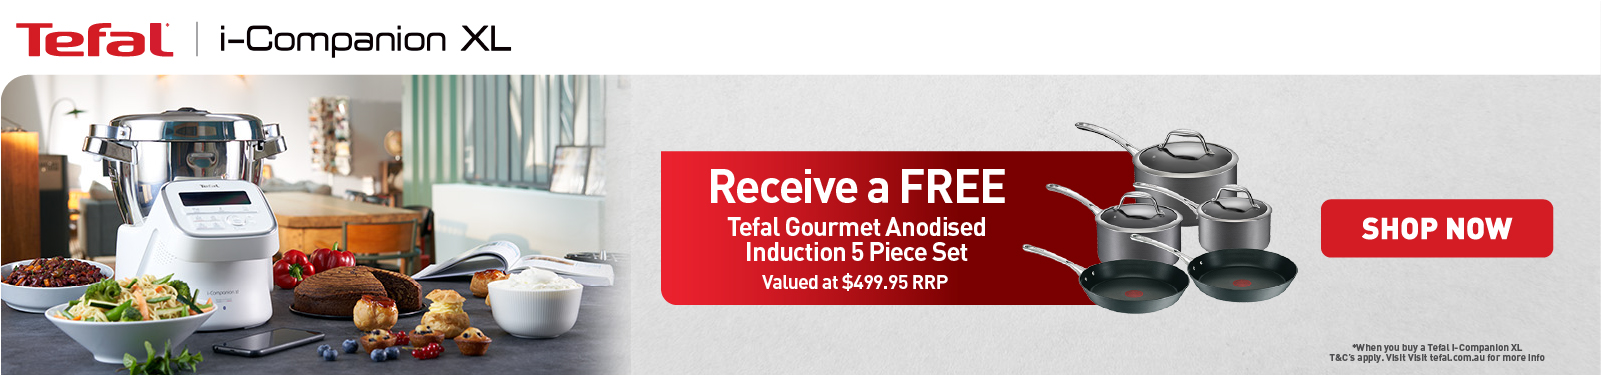 Bonus Tefal Gourmet Anodised Induction 5 Piece Set when you purchase an i-Companian XL at Retravision